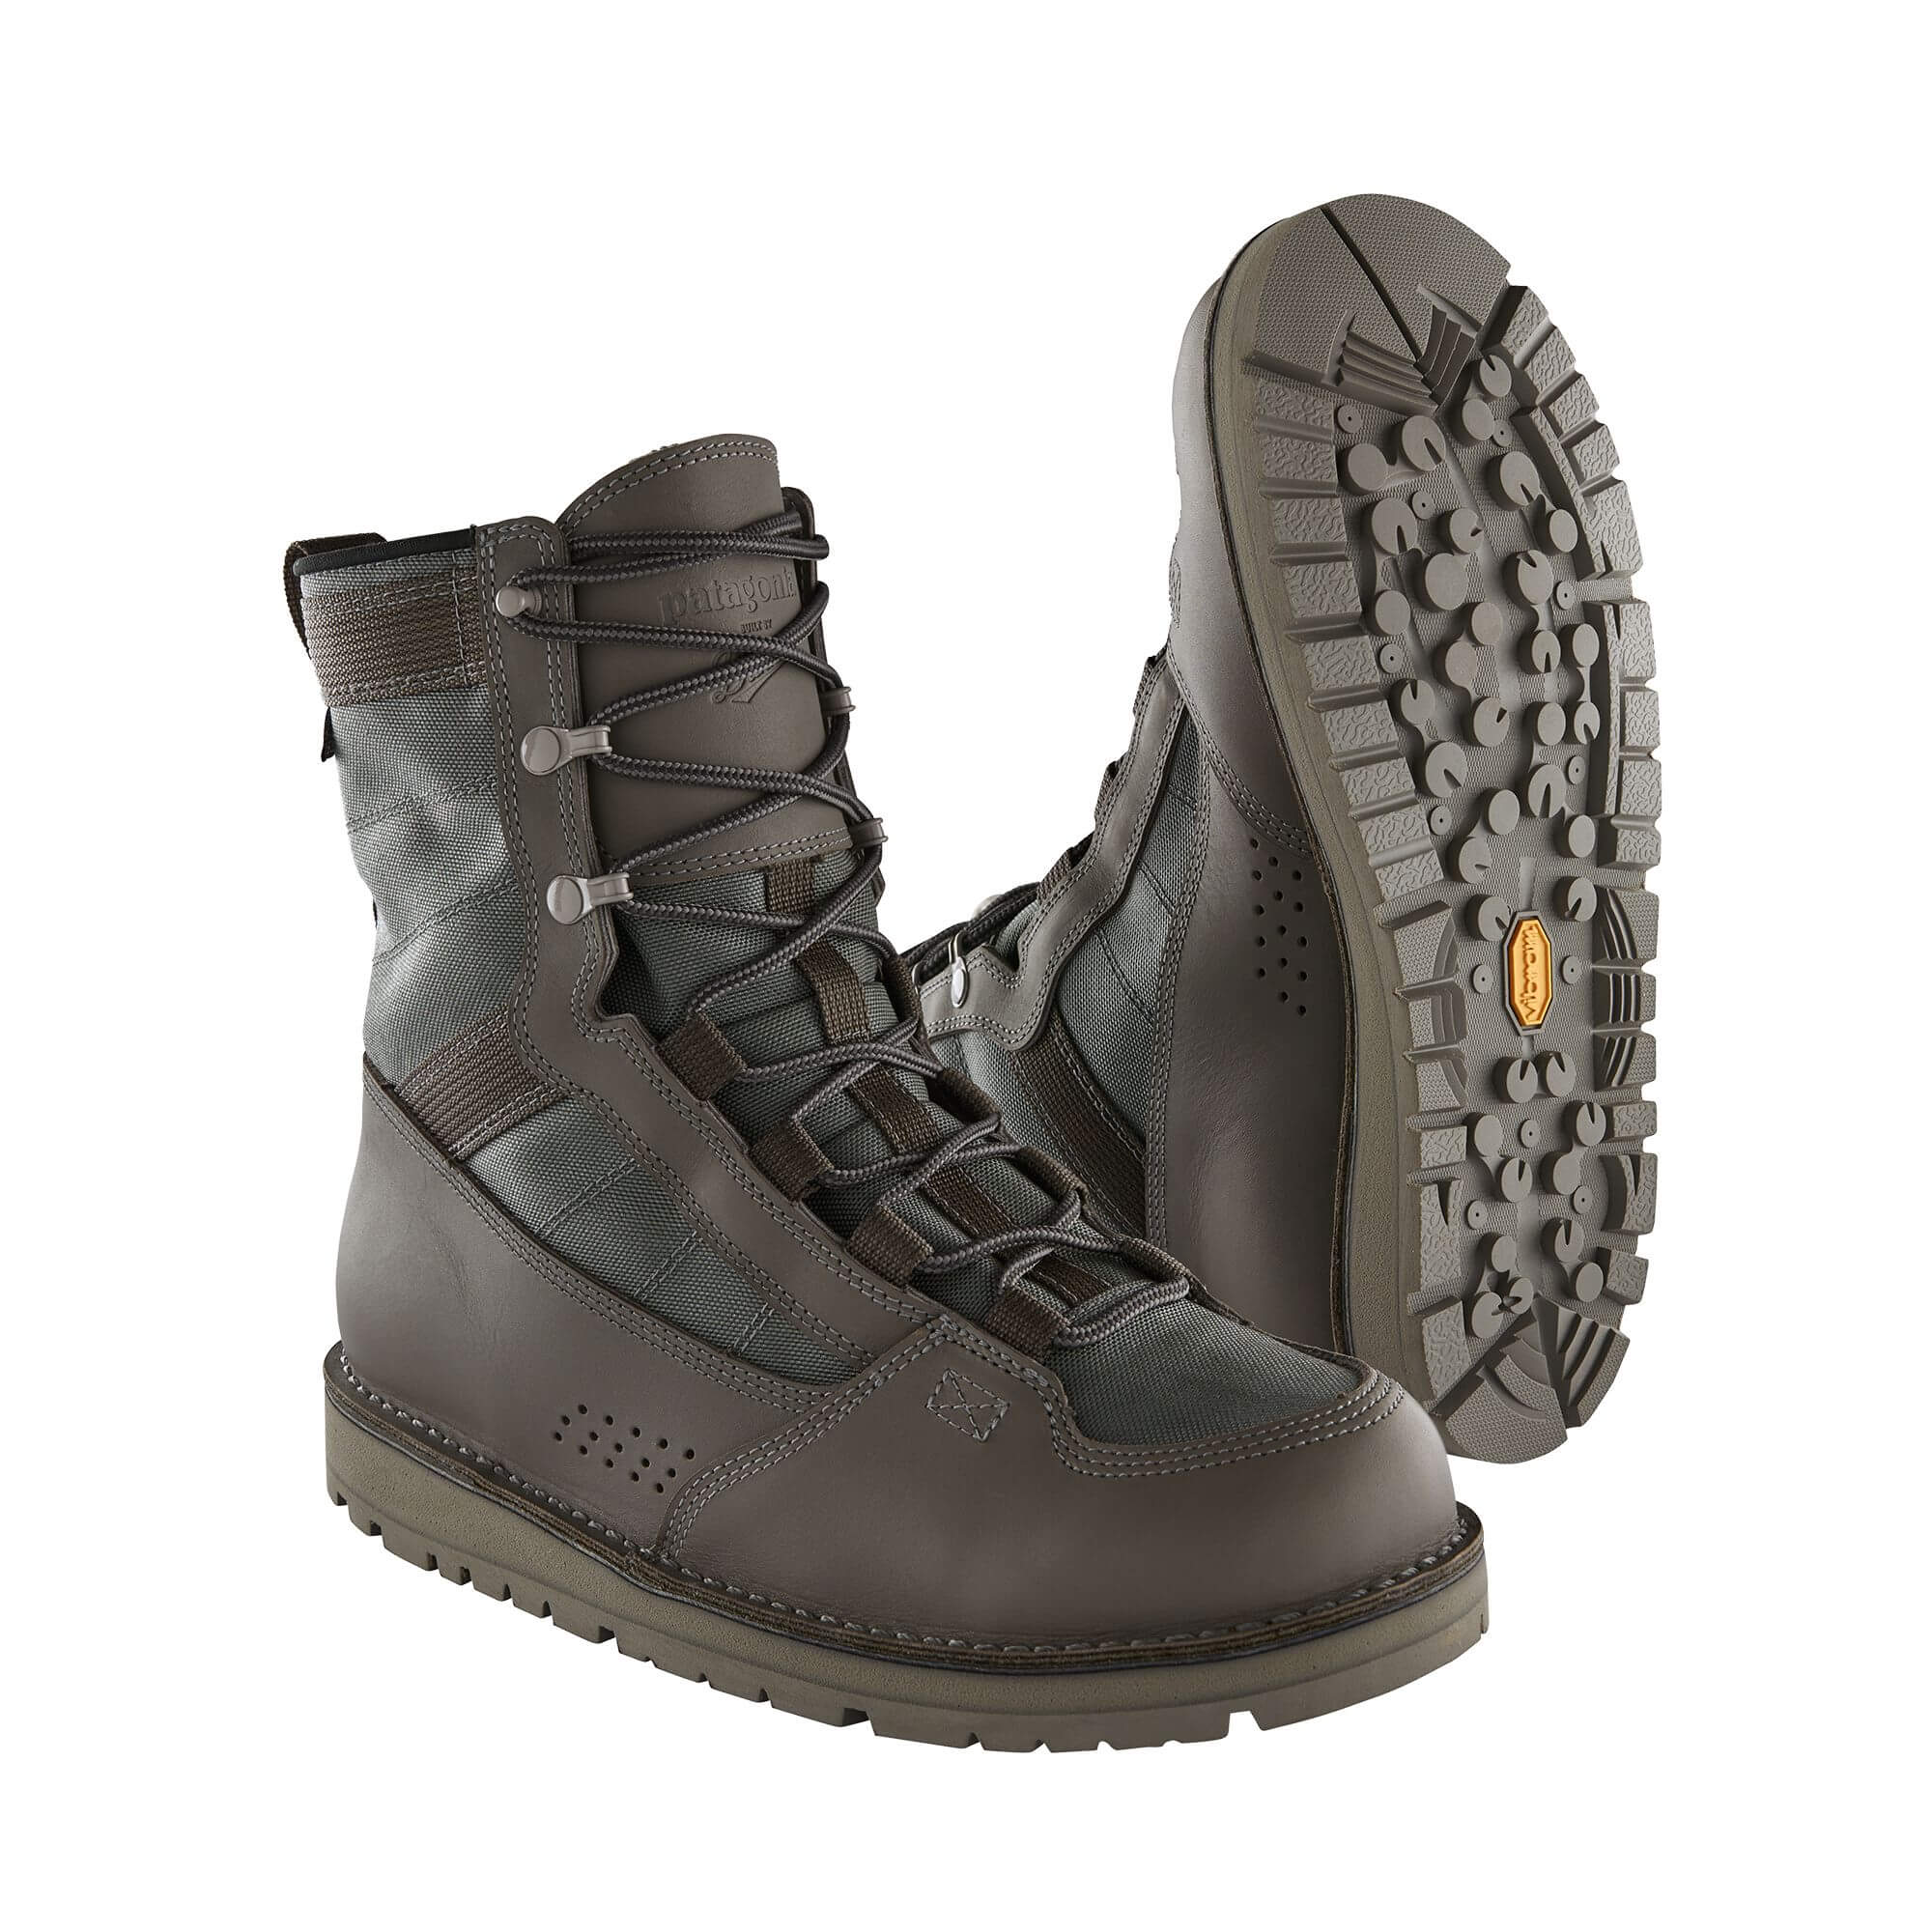 Patagonia River Salt Wading Boot (by Danner) - 8